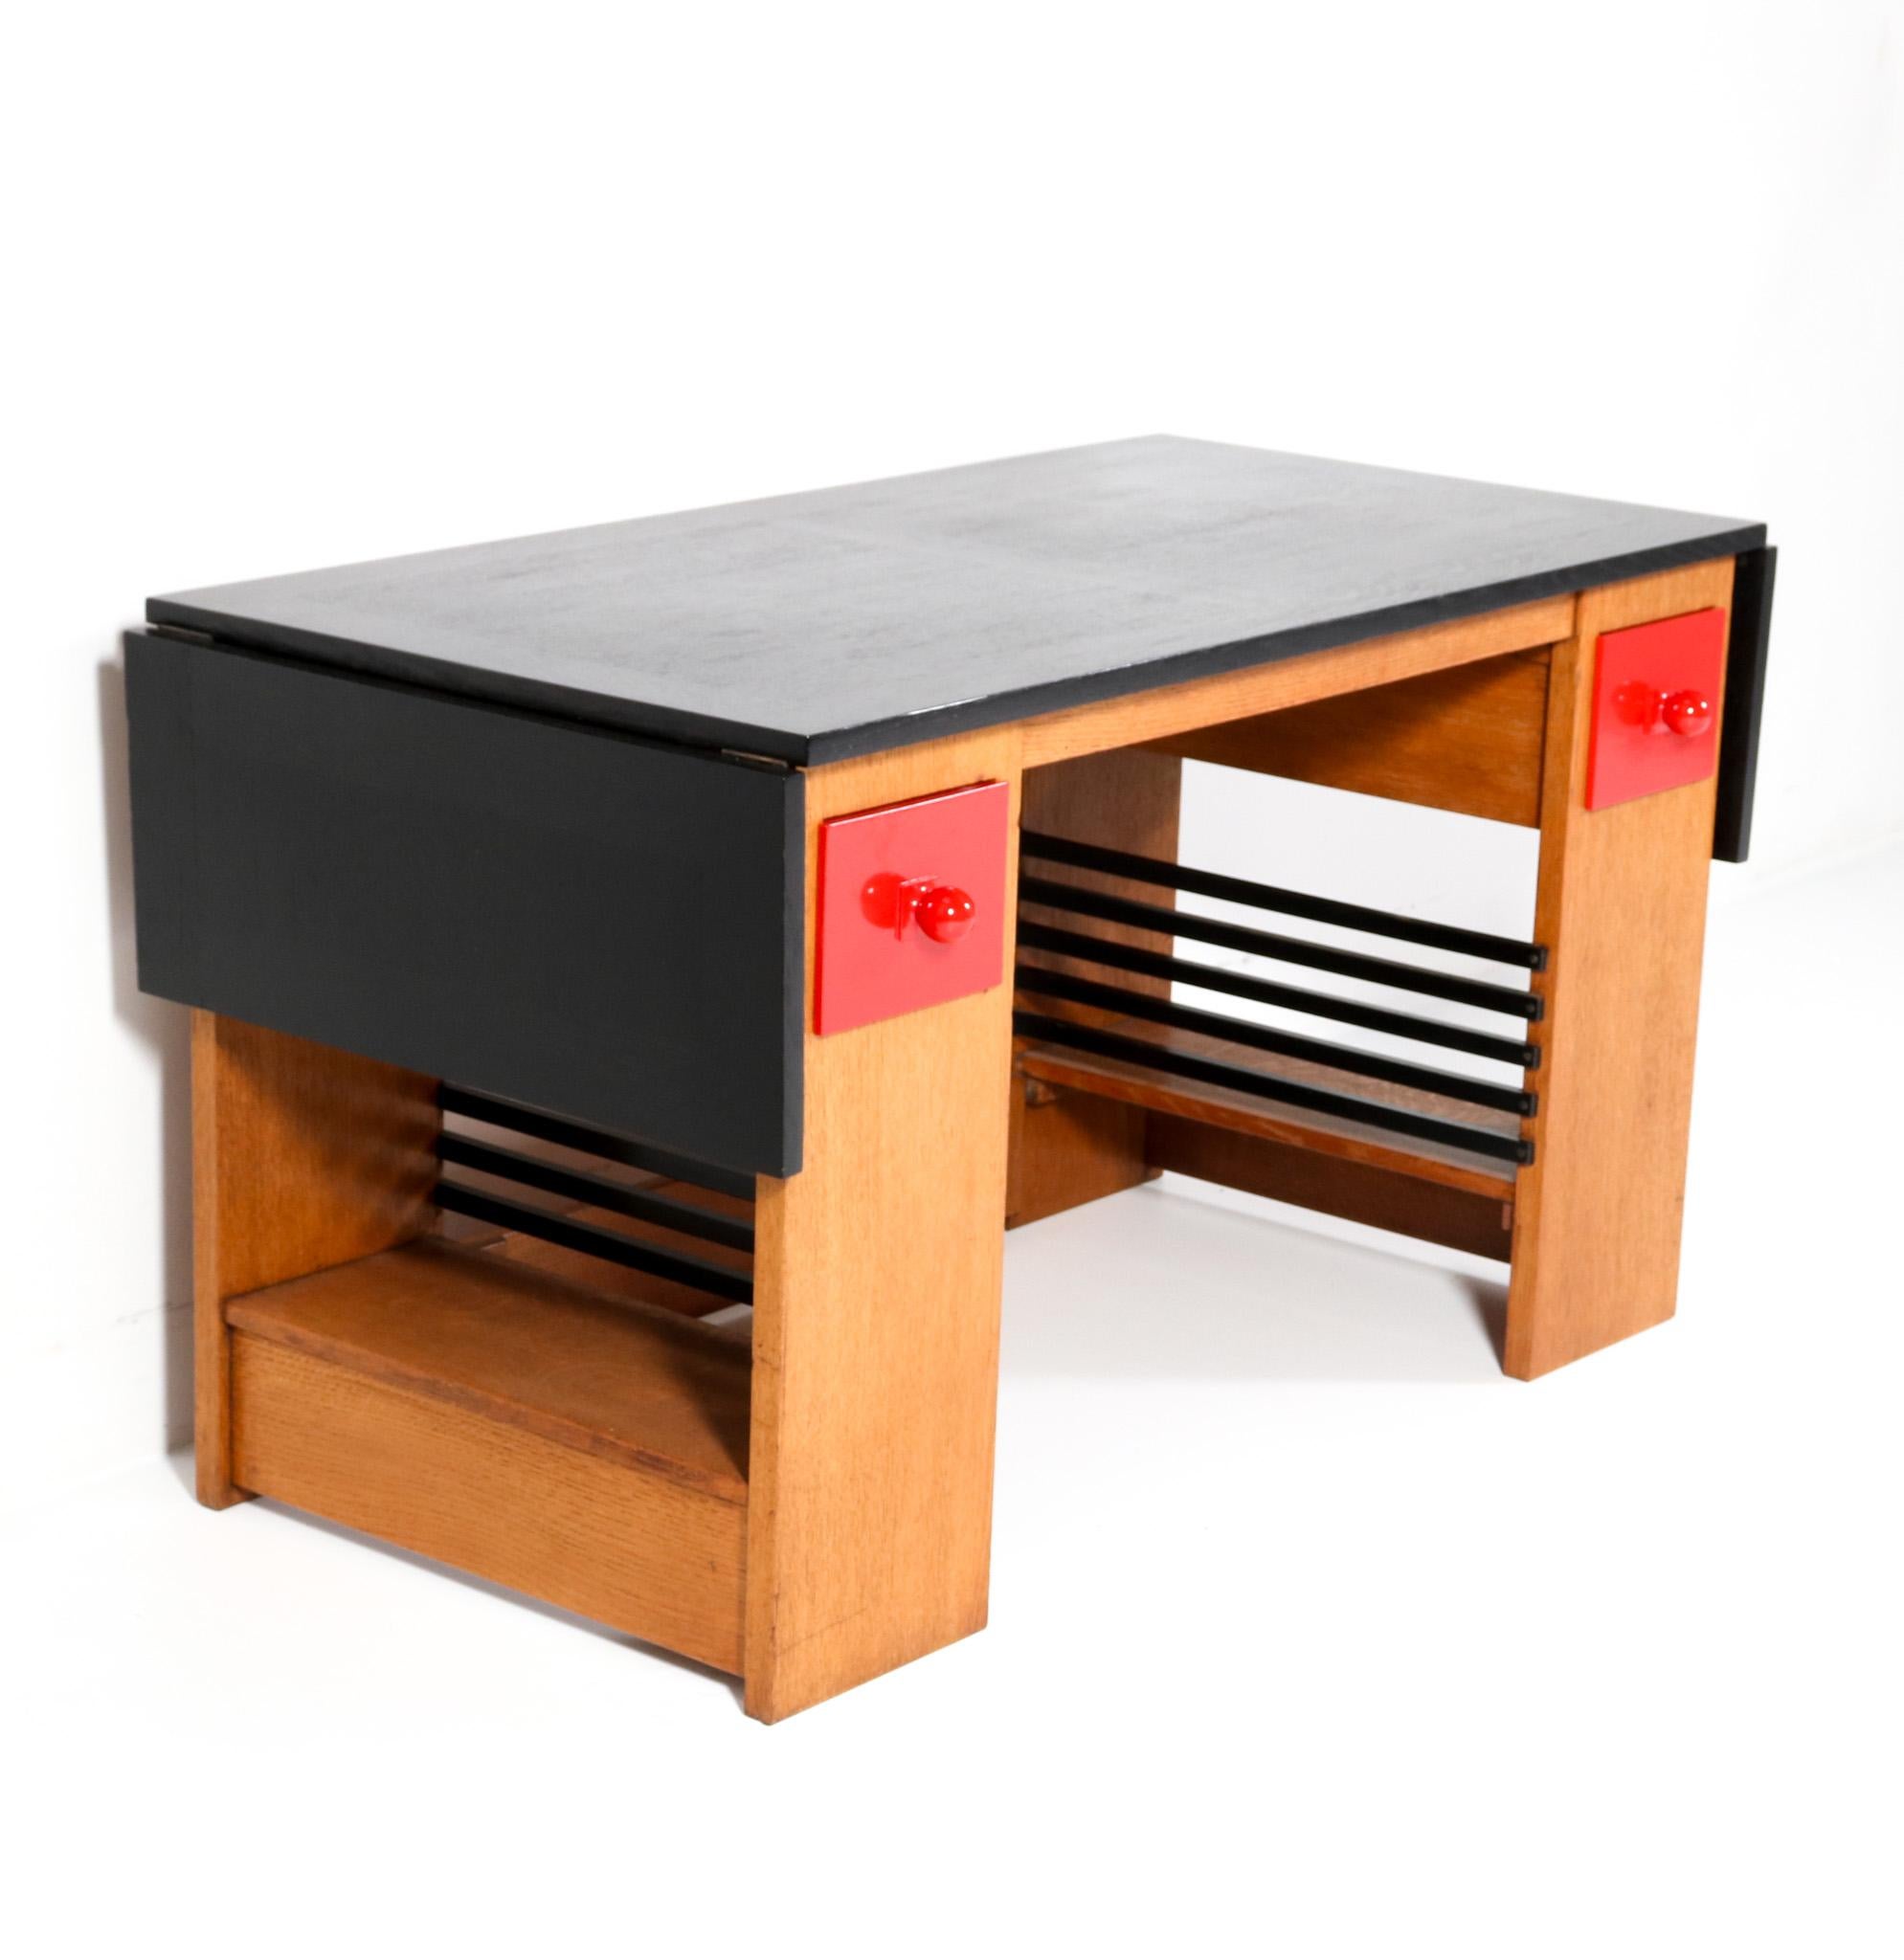 Dutch  Art Deco Modernist Desk or Writing Table by Hendrik Wouda for Pander, 1920s For Sale